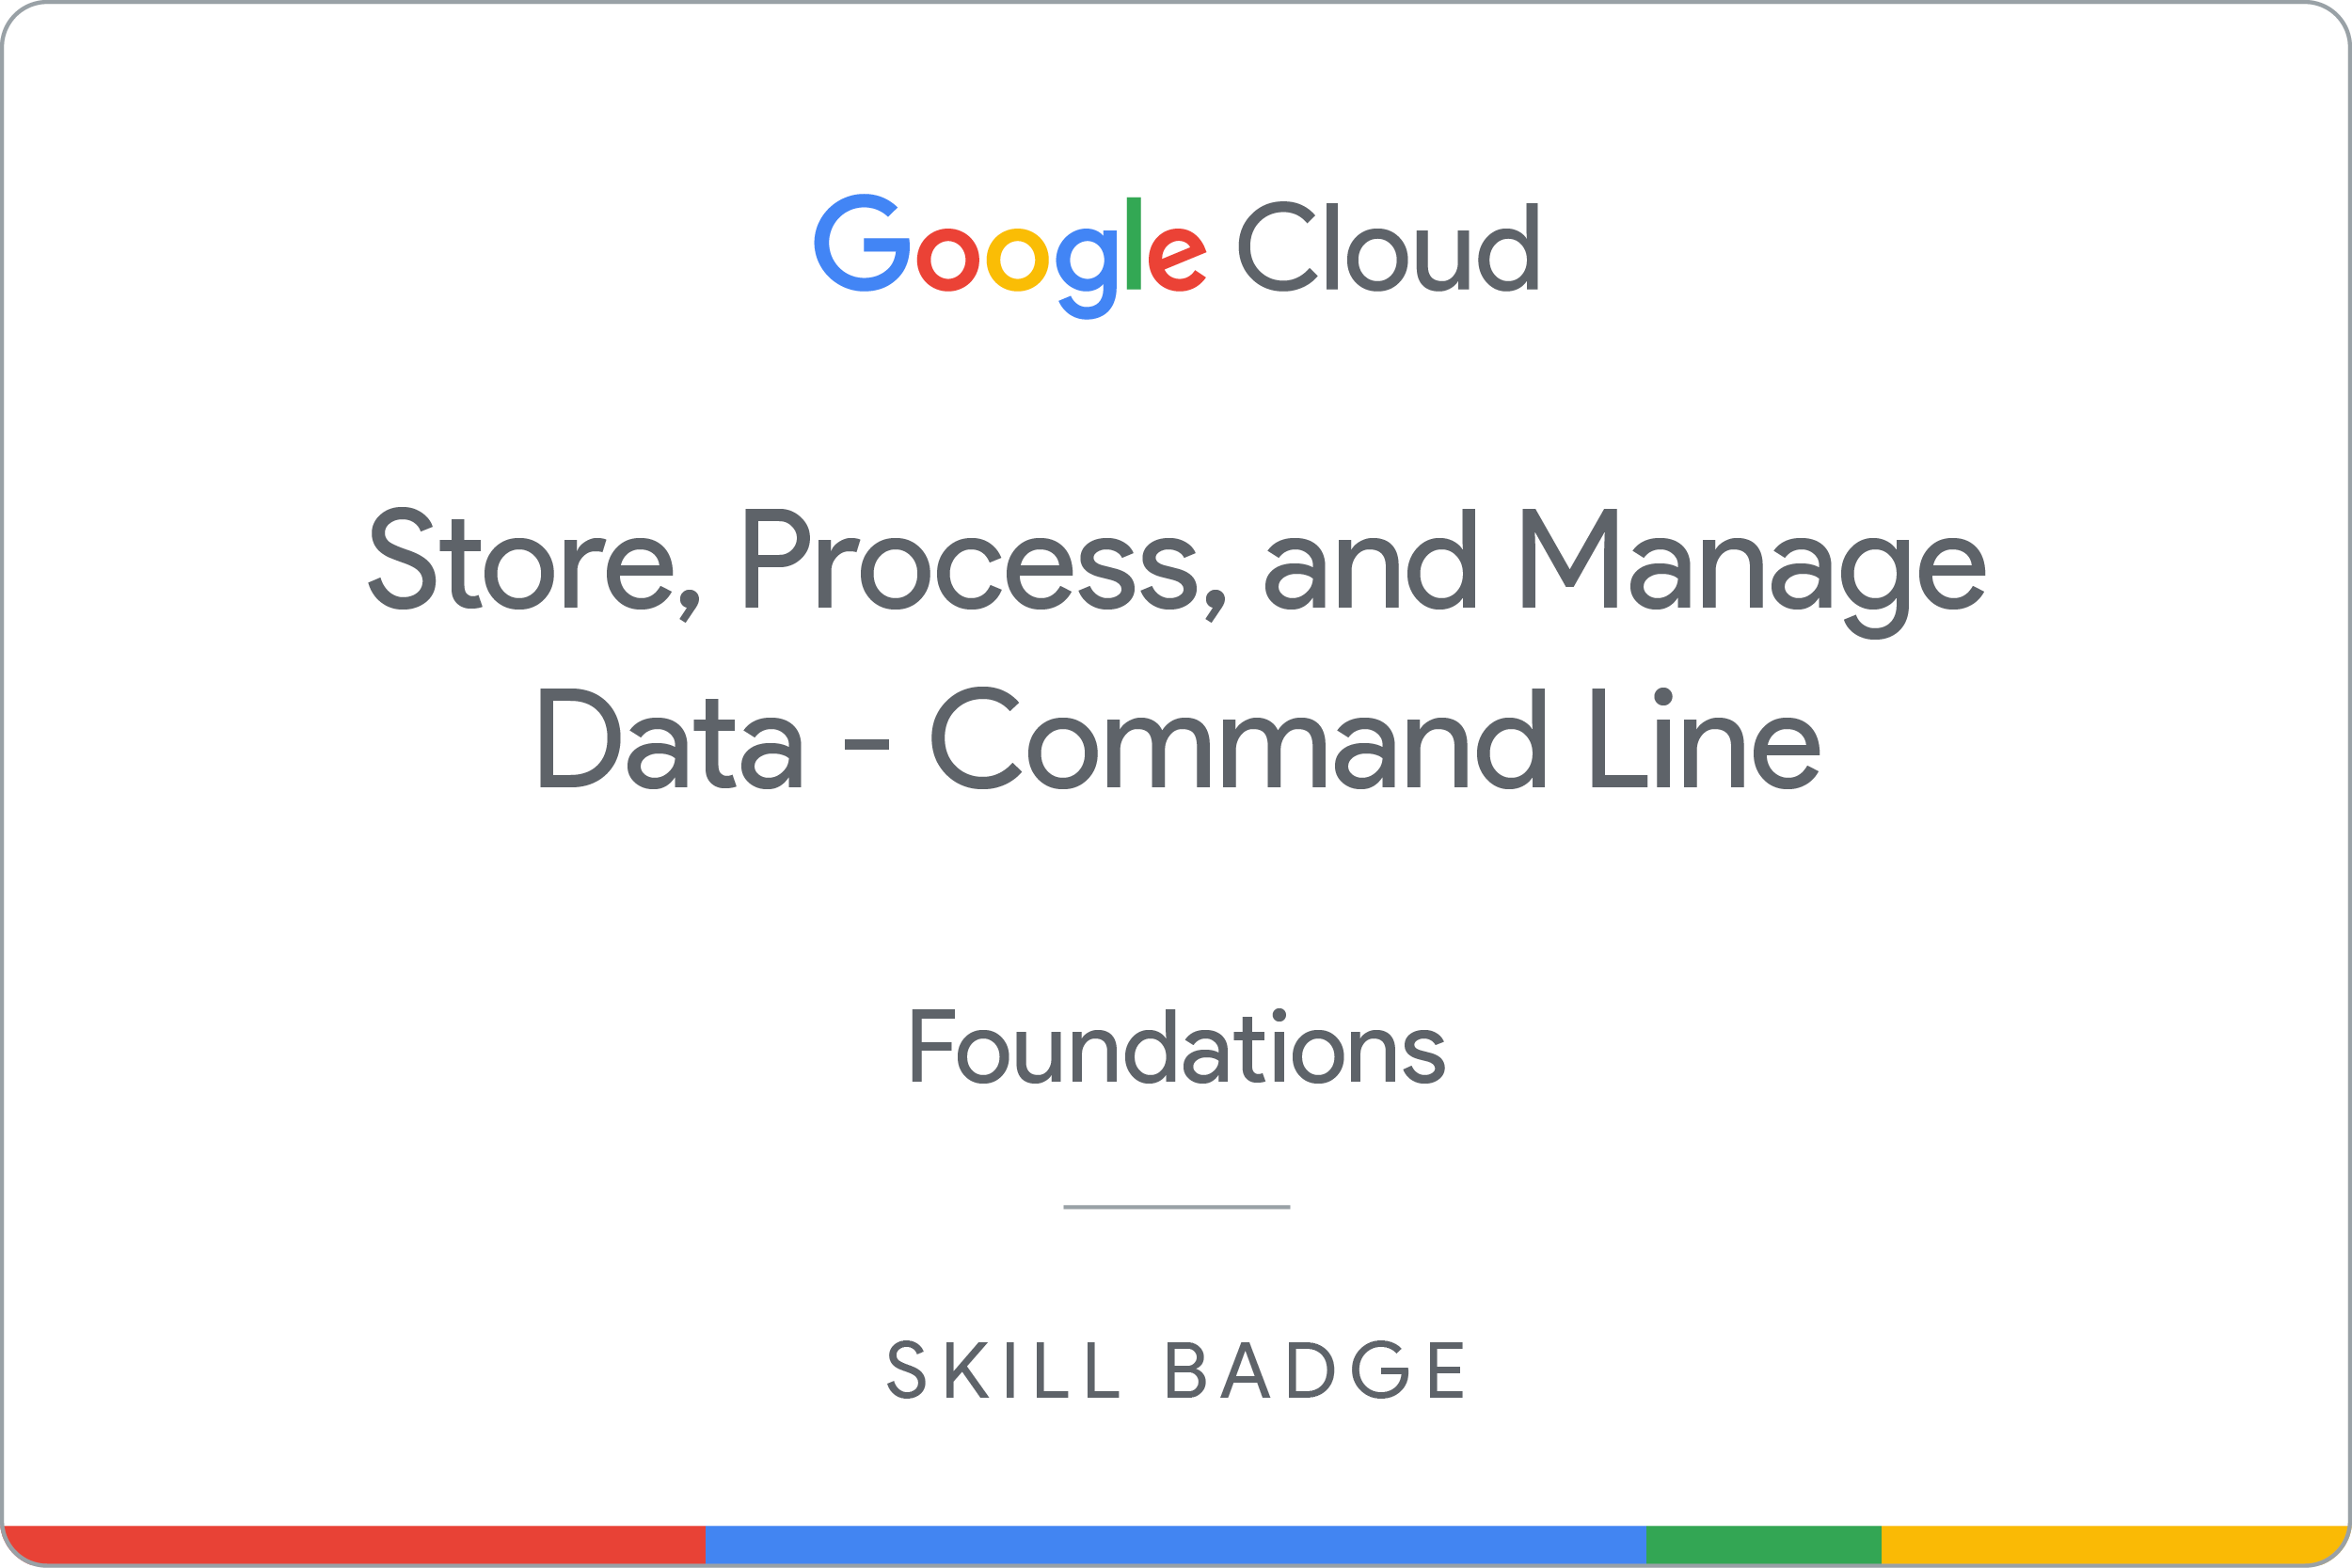 Store, Process, and Manage Data on Google Cloud - Command Line badge